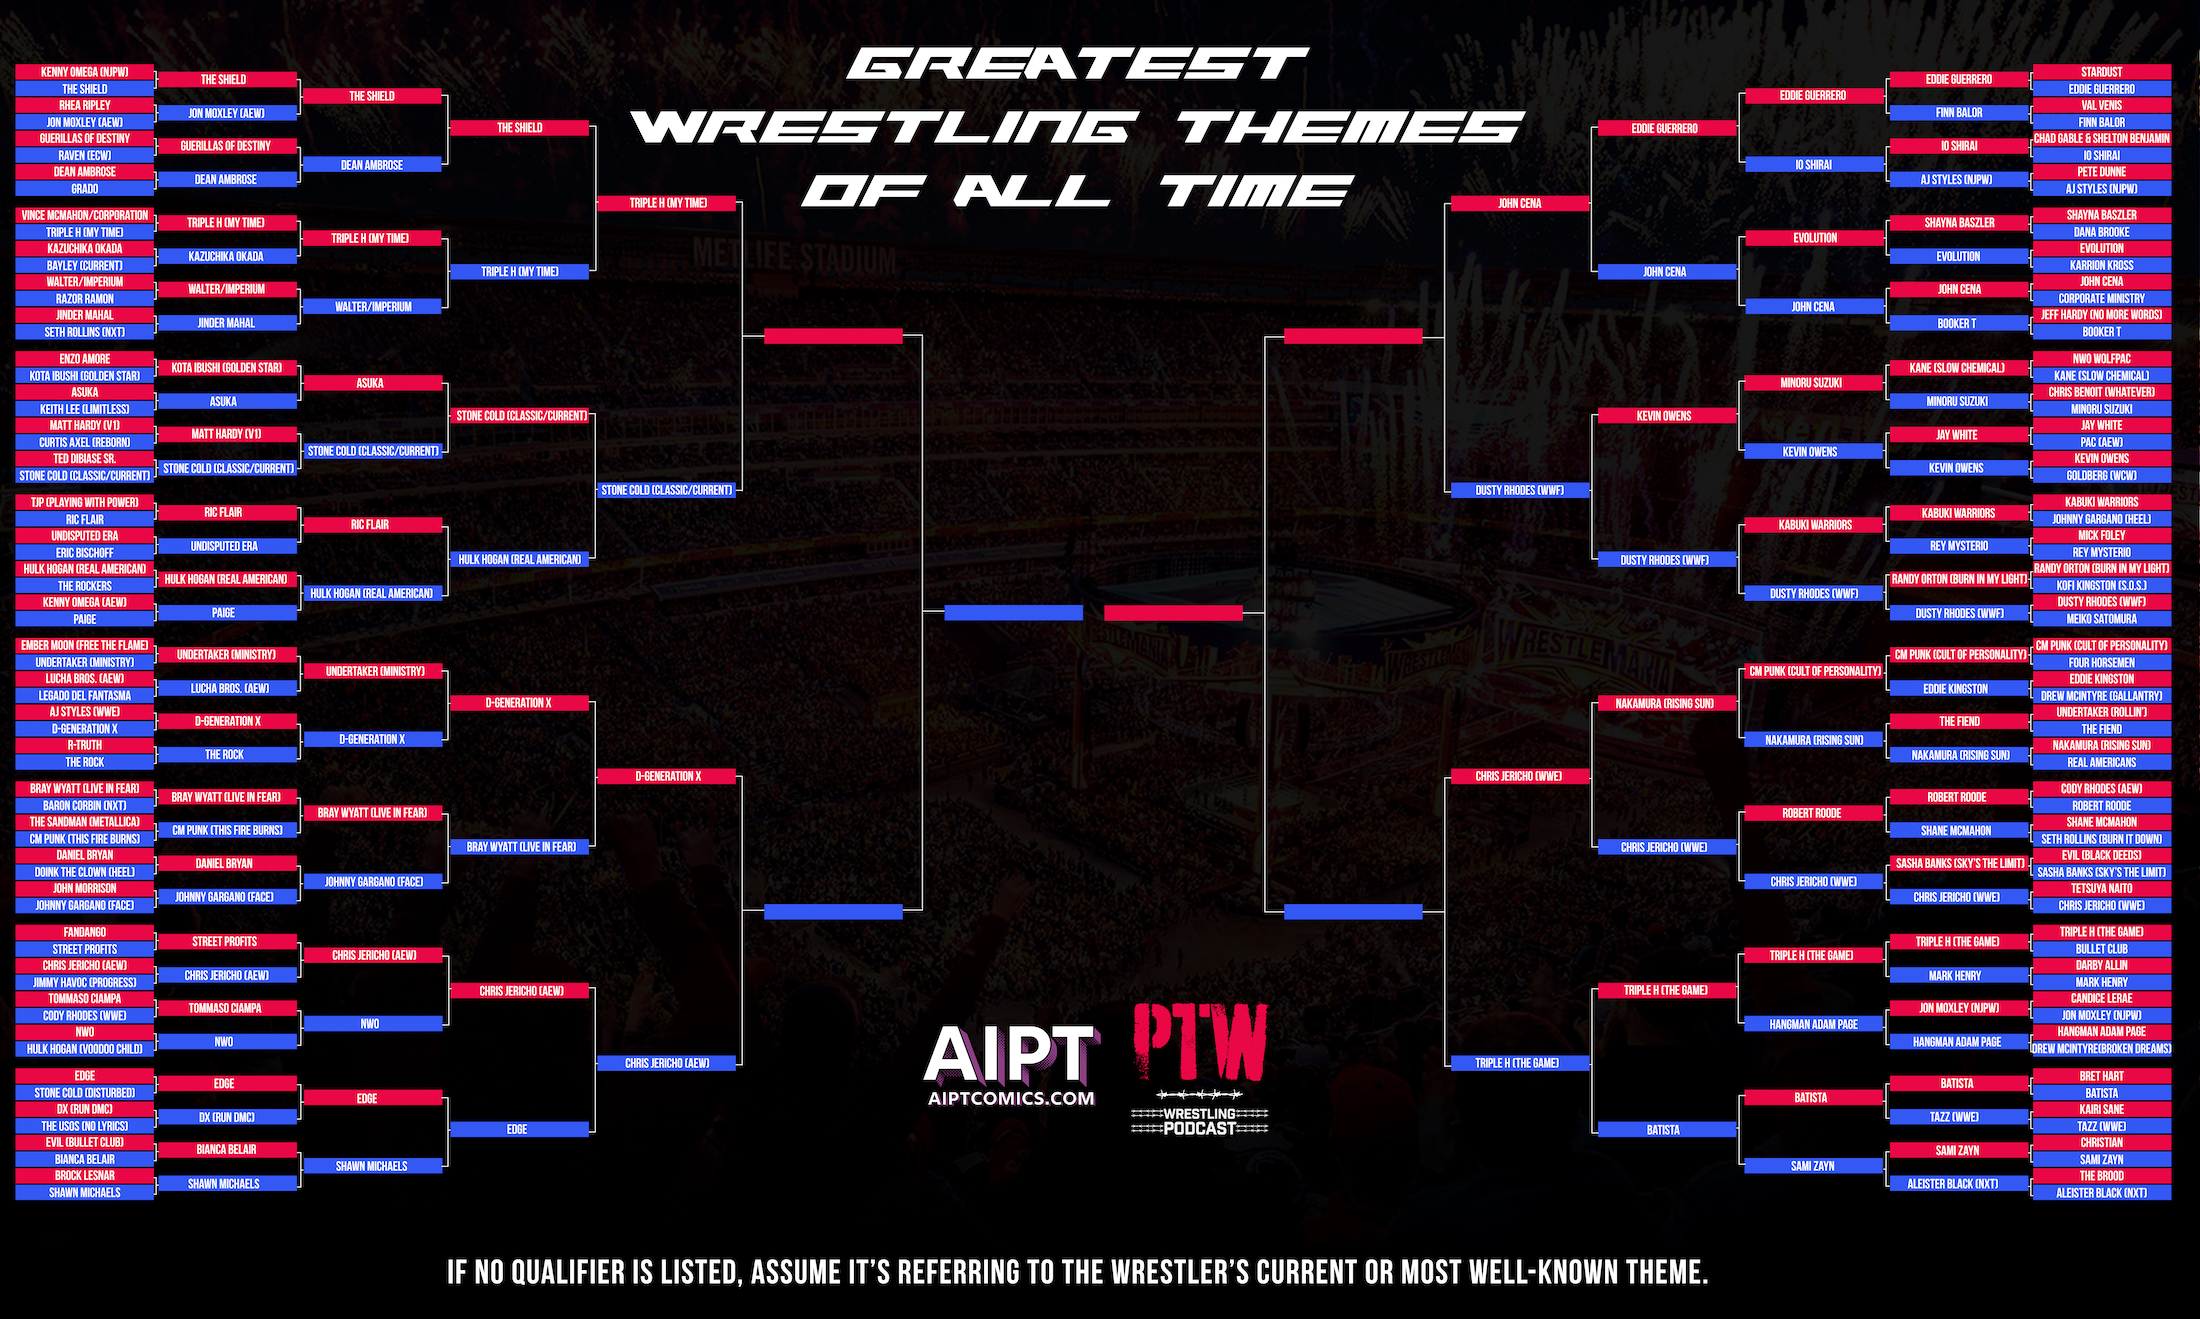 The Greatest Wrestling Themes of All Time: Round 4 results